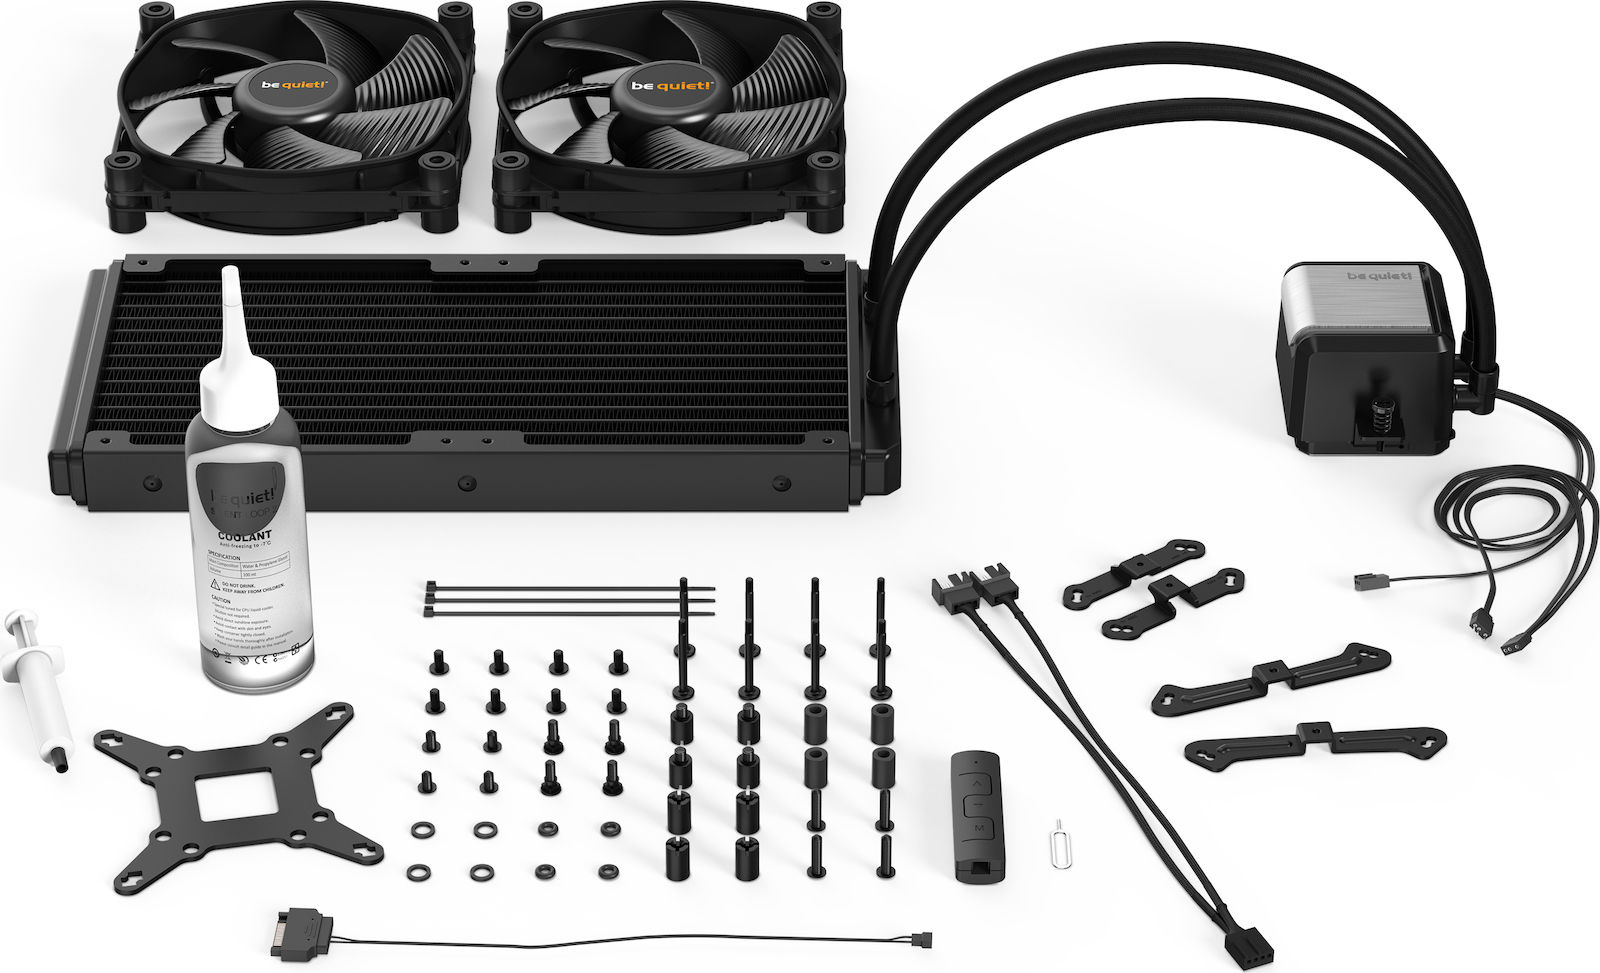 The Be Quiet! Silent Loop 2 AIO Cooler Review: Quiet and Unassuming